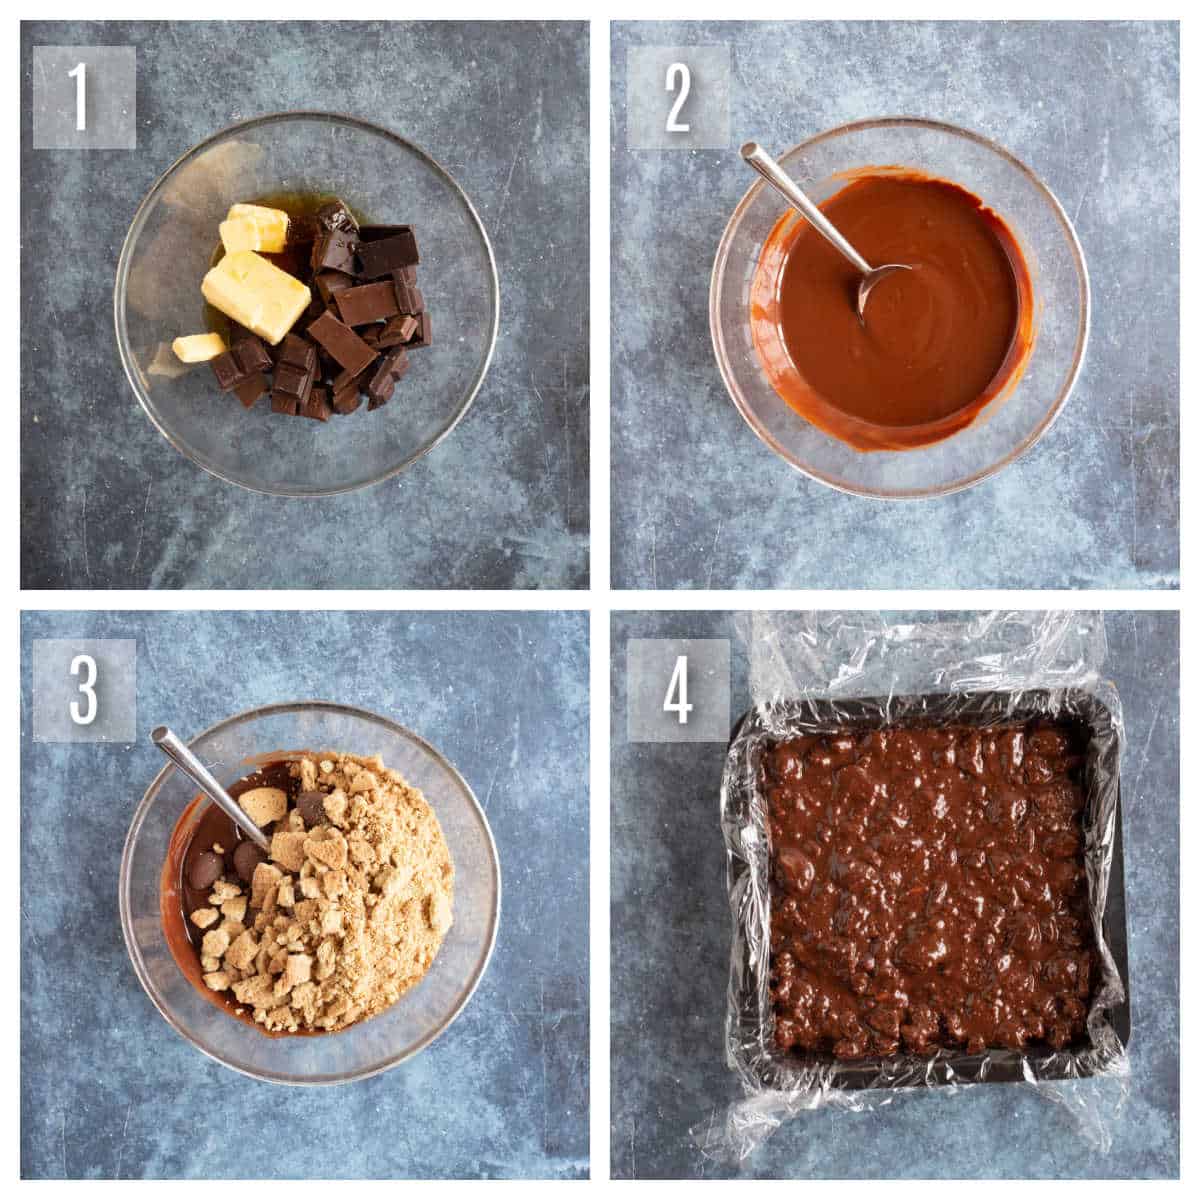 How to make a chocolate tiffin base - step by step photos.